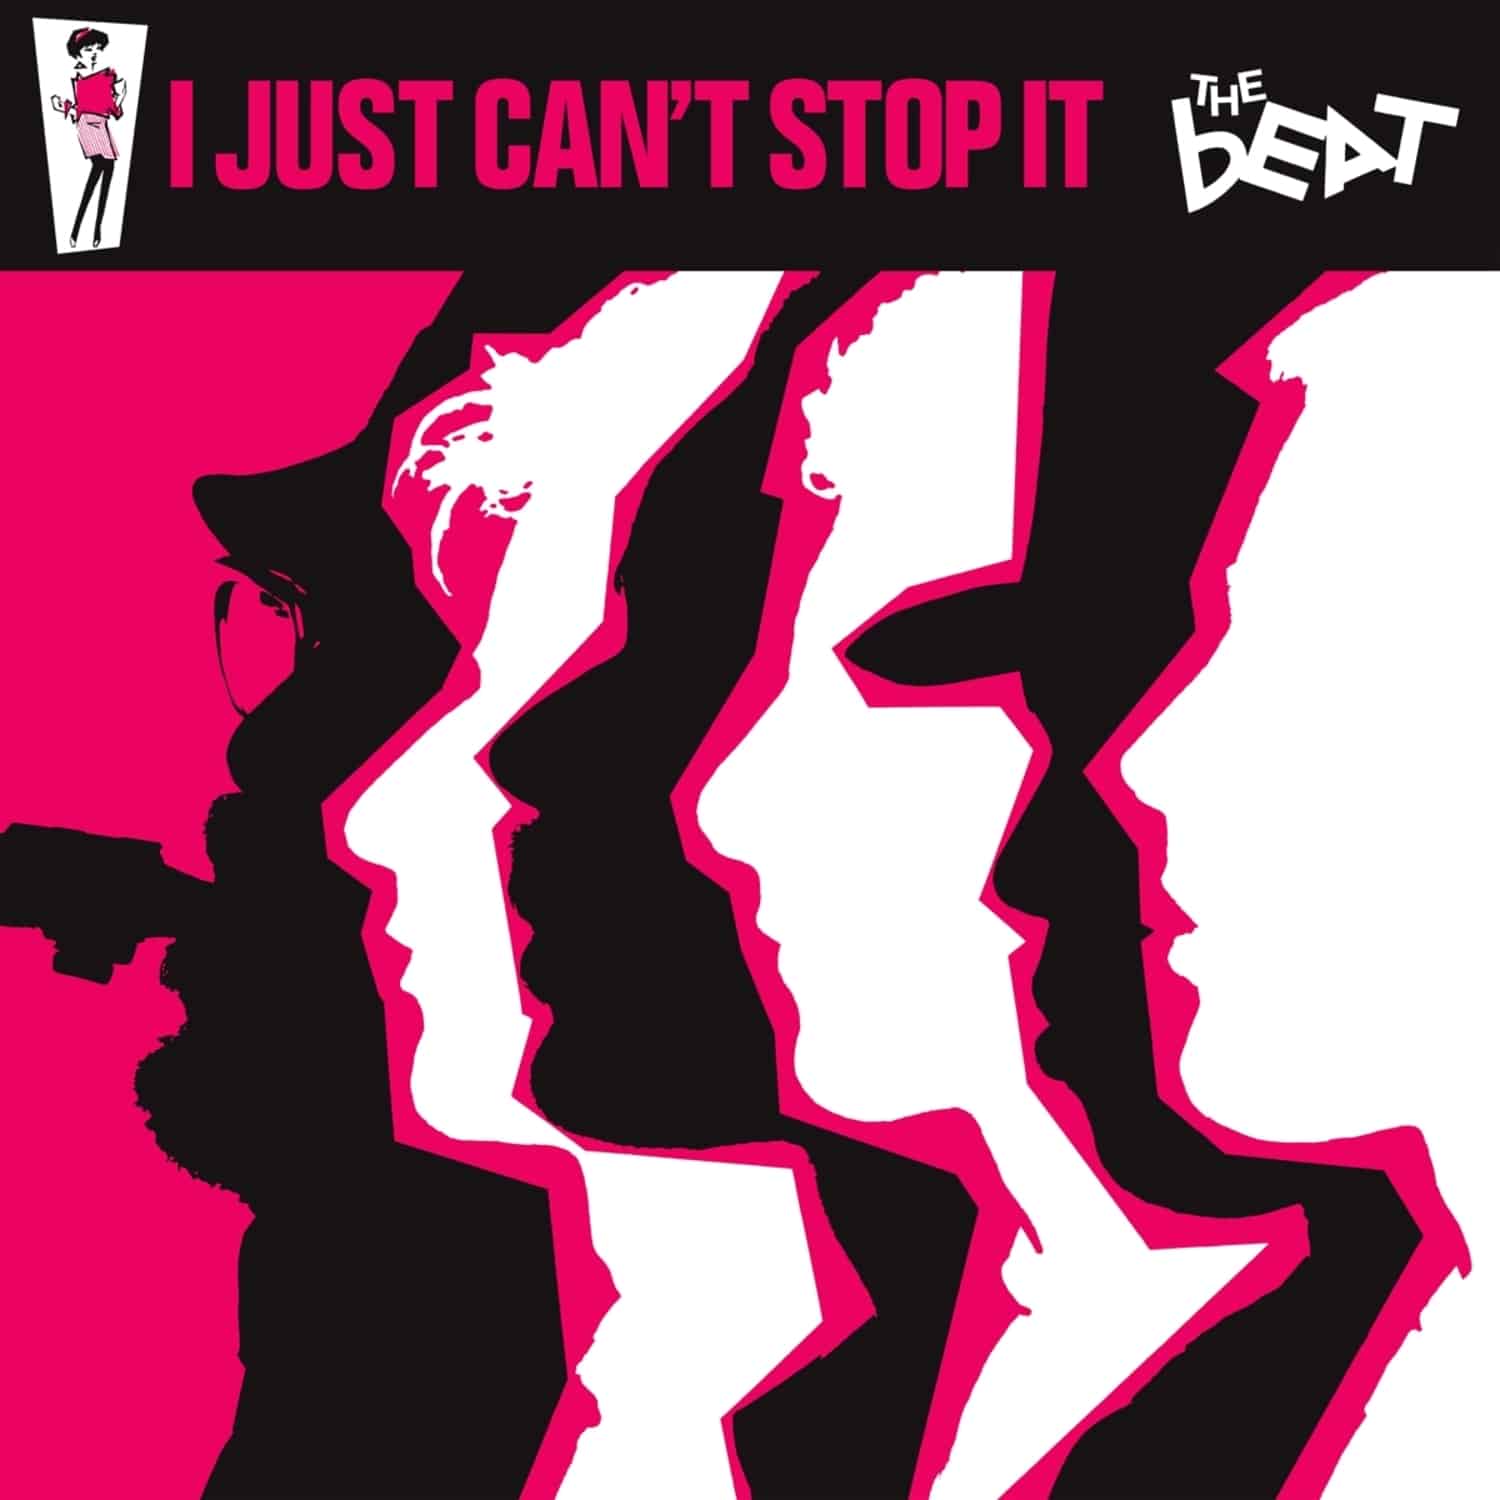 The Beat - I JUST CAN T STOP IT